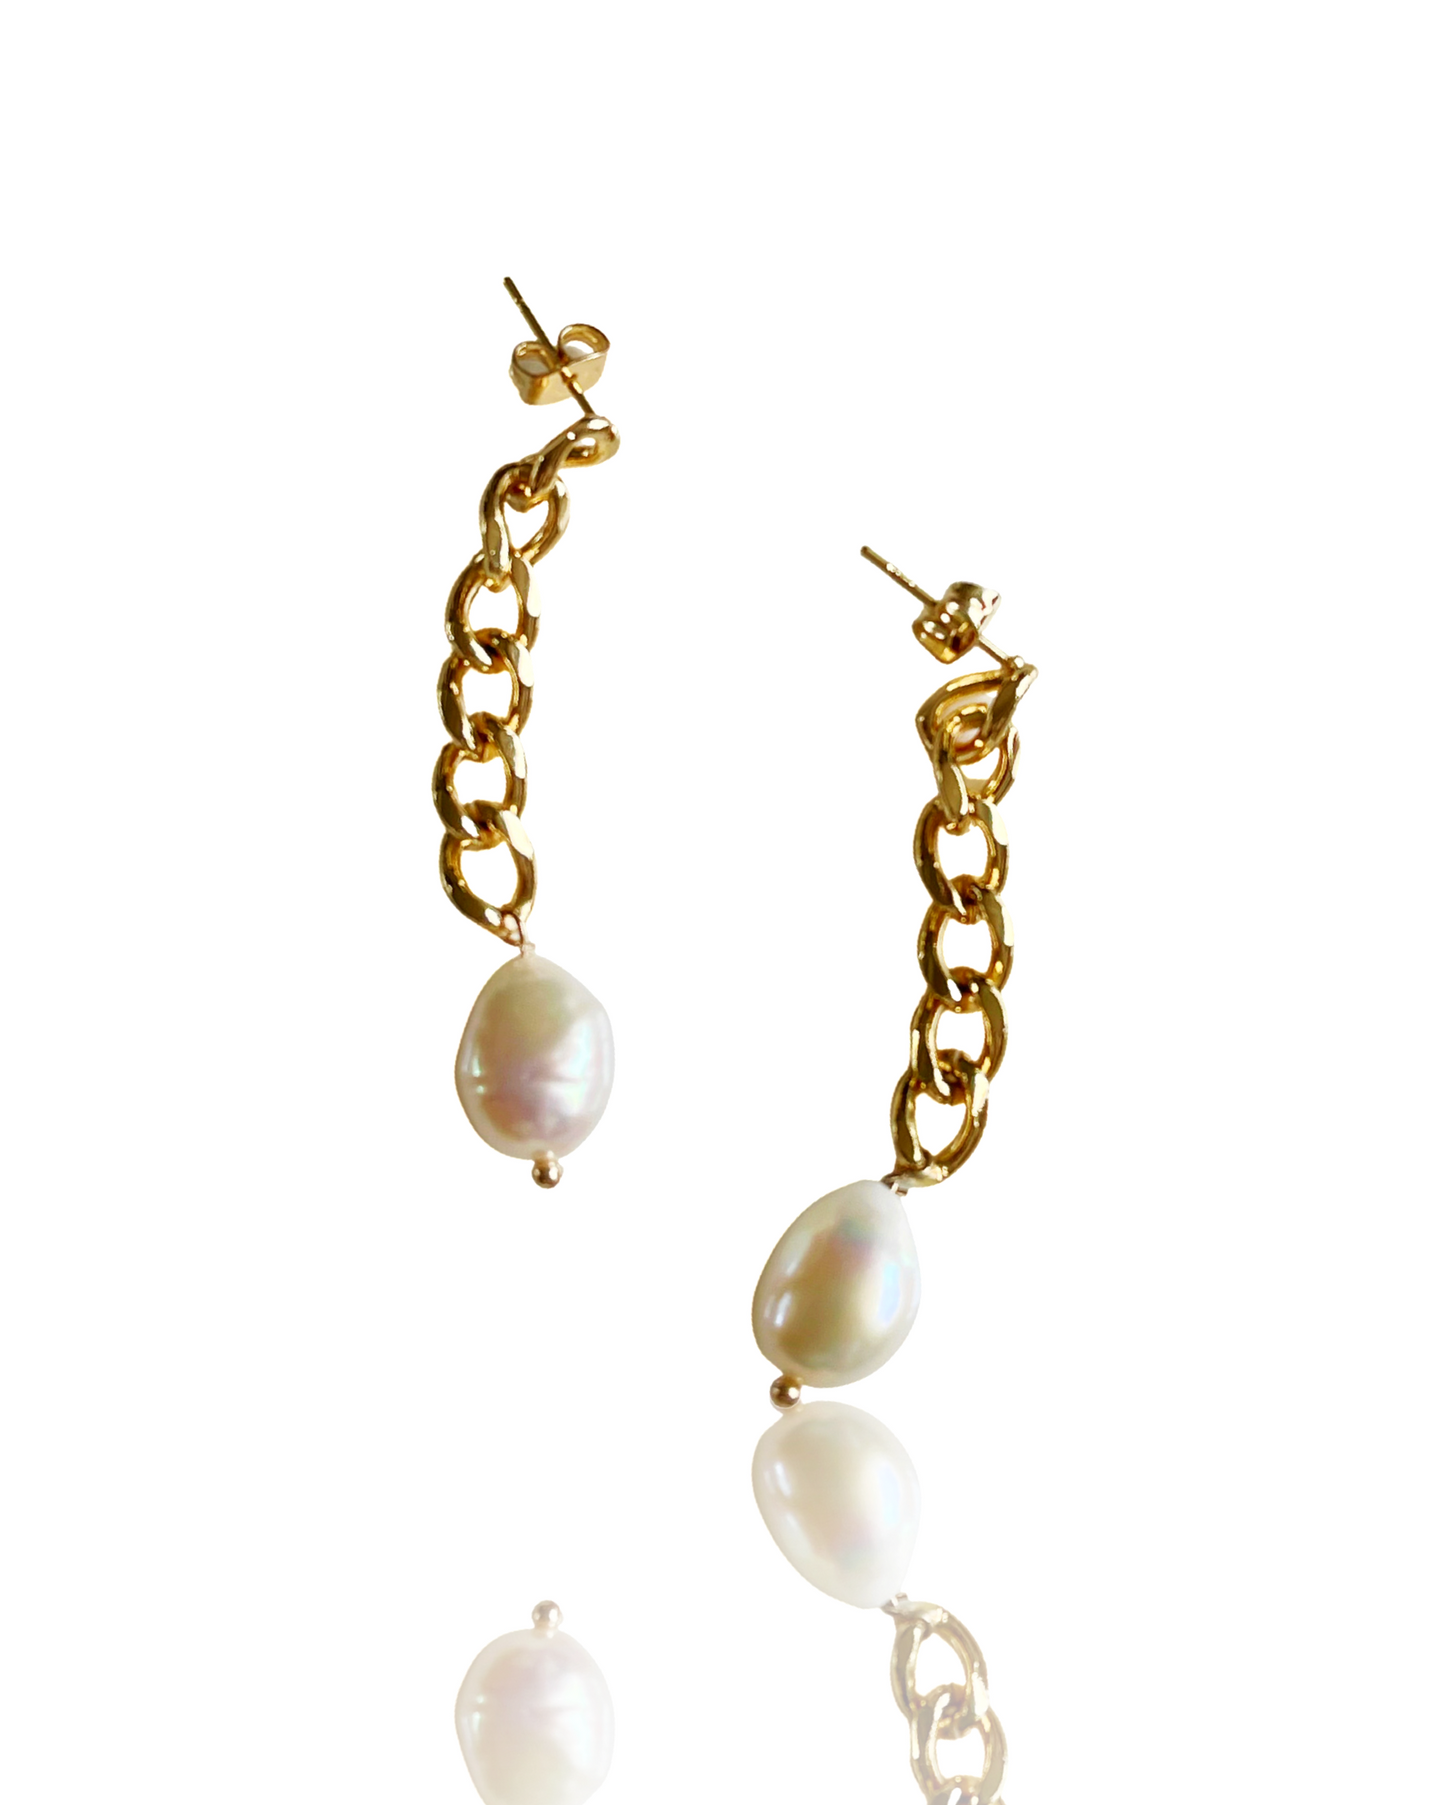 A pearl with a chain earrings